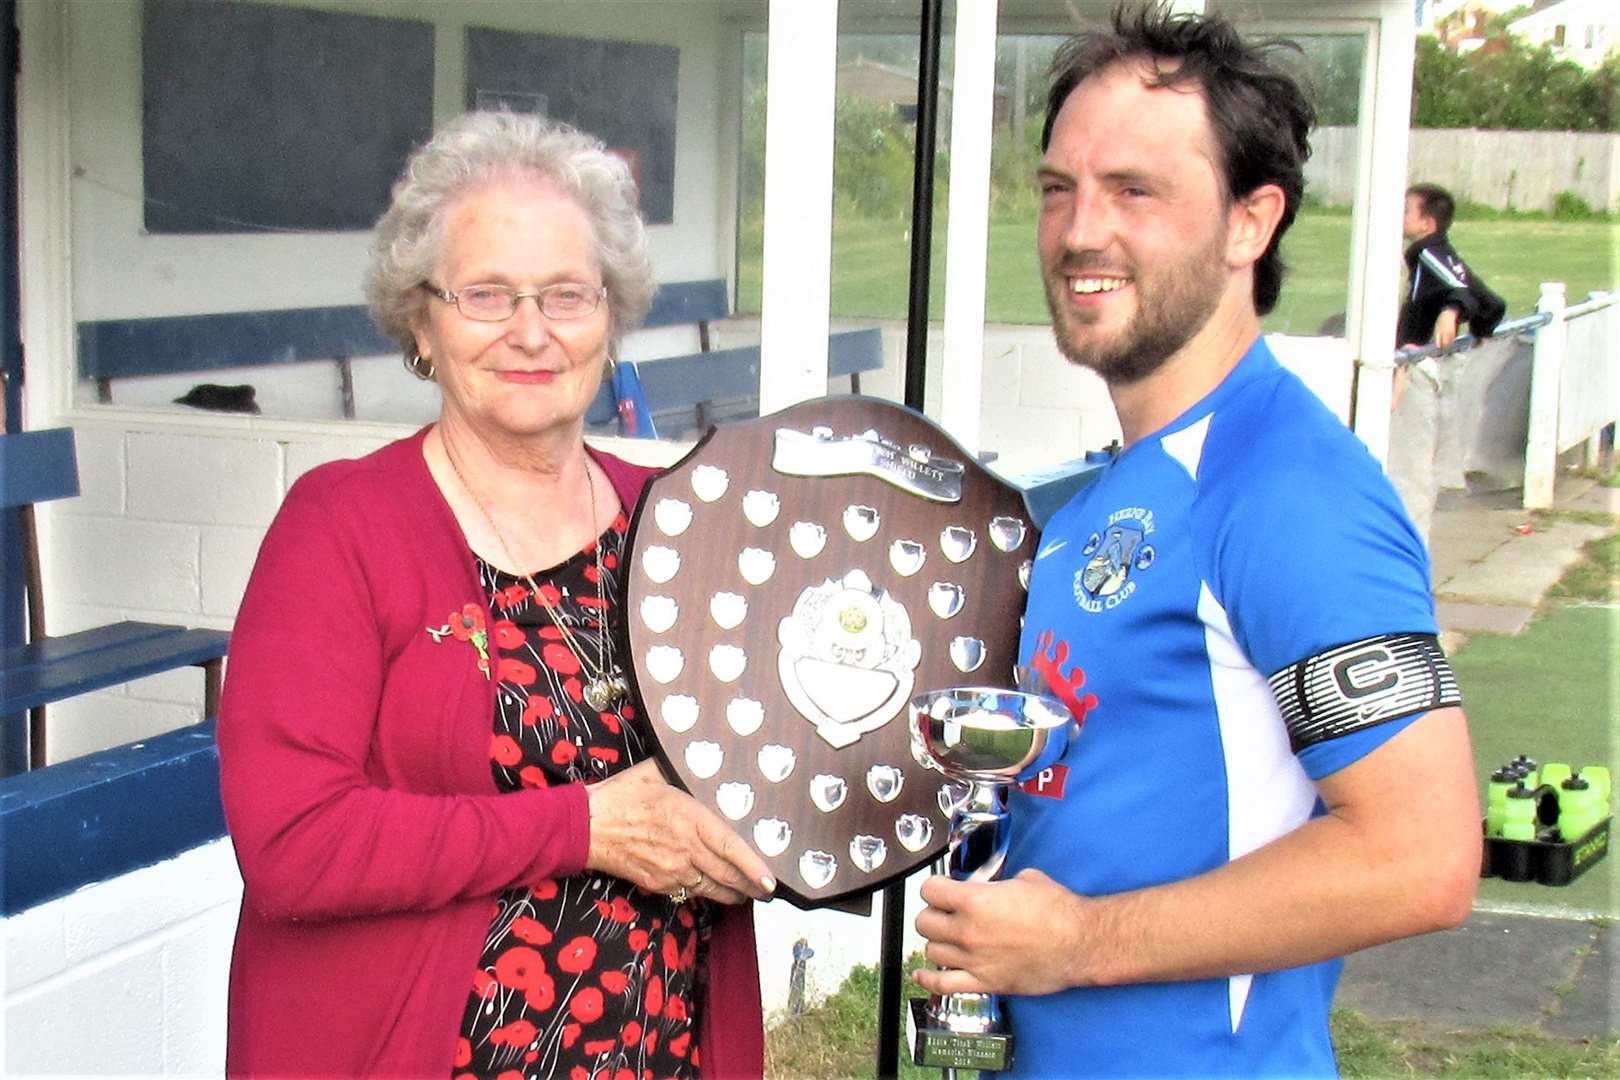 Herne Bay skipper Dan Lawrence is presented with the Titch Willett Trophy